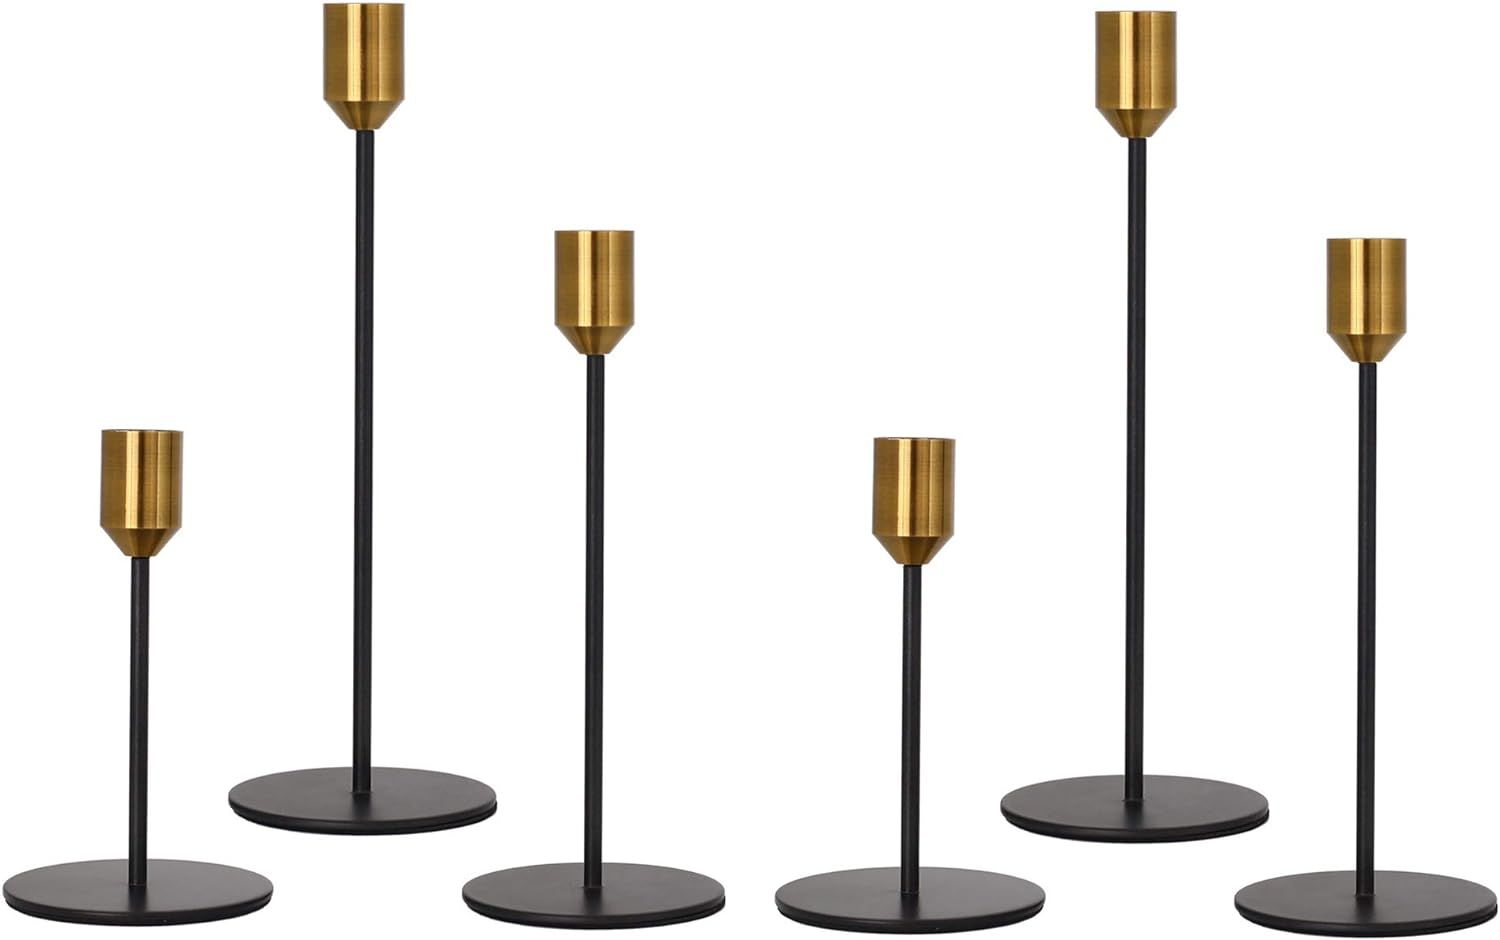 Denique Candlestick Holders - Furniture deals ltkholiday gift idea sale now affordable giftguide | Amazon (US)